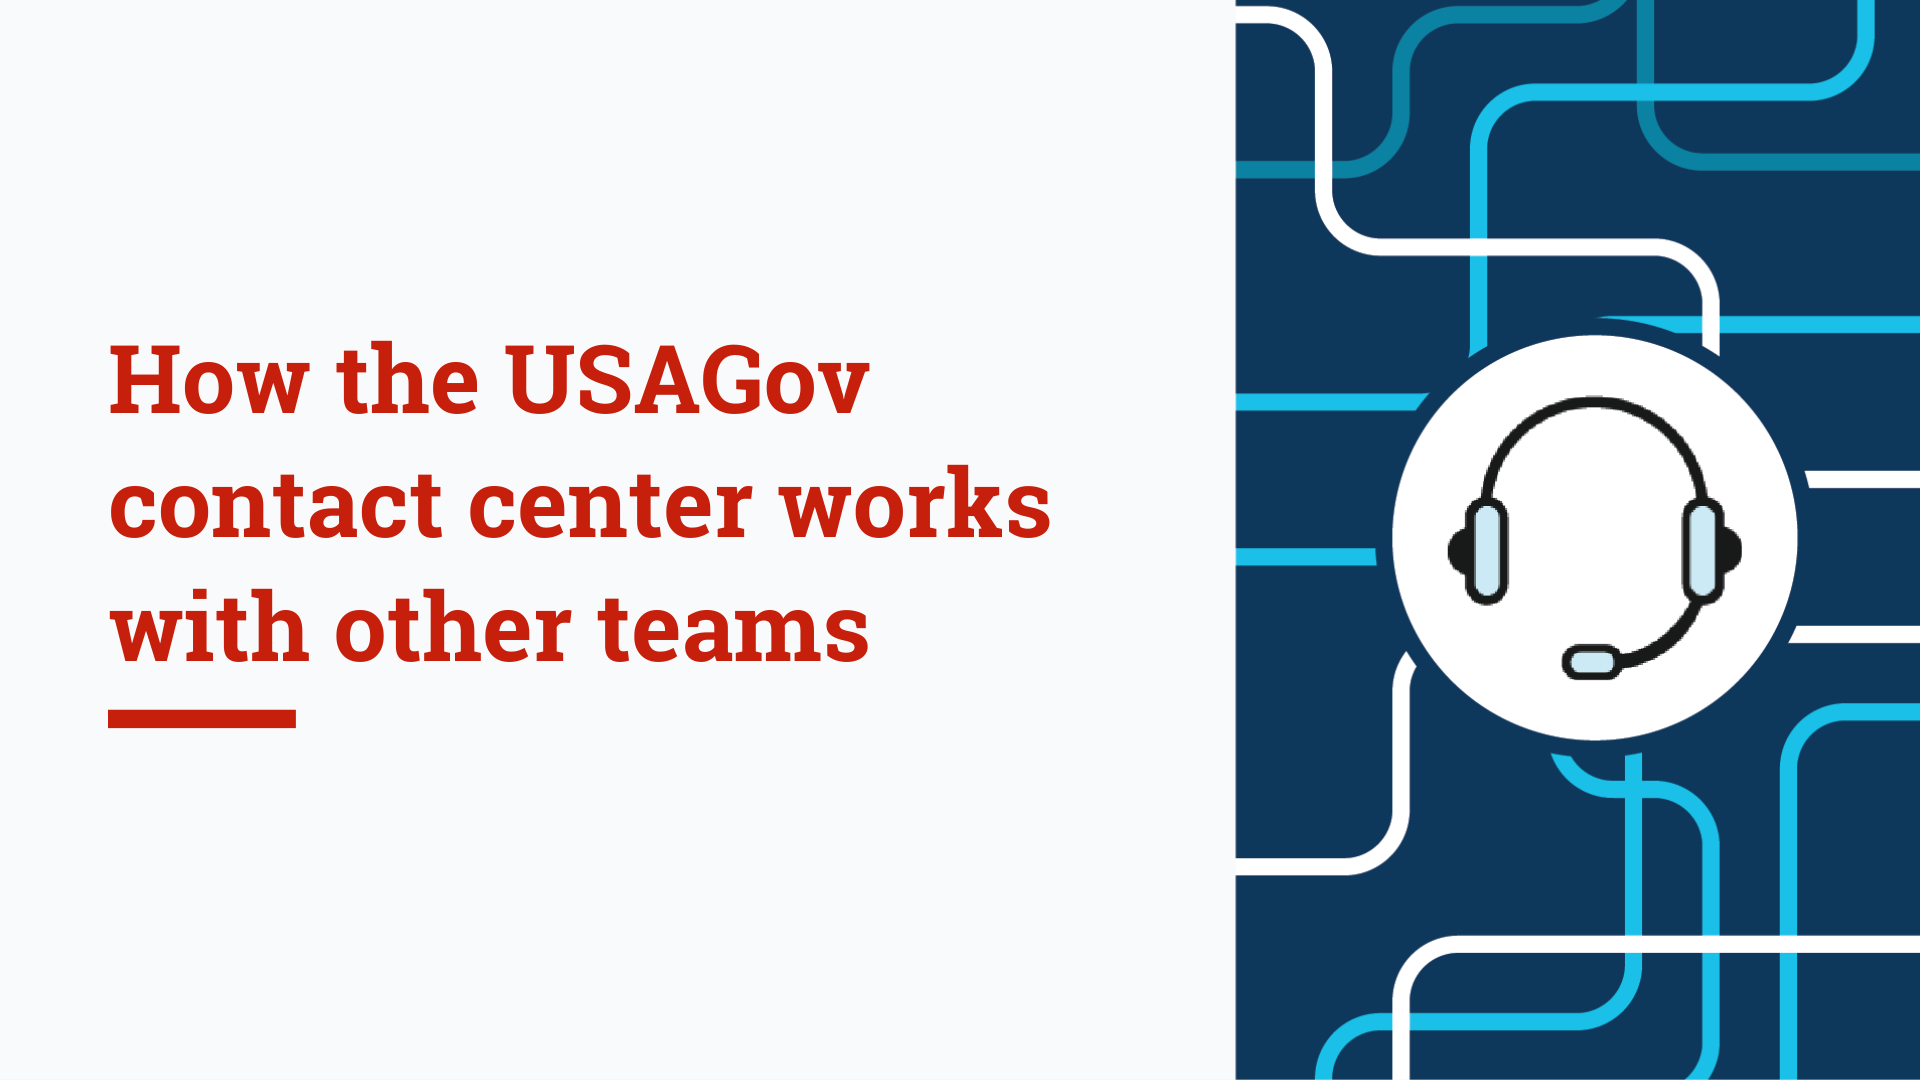 How the USAGov contact center work with other teams.